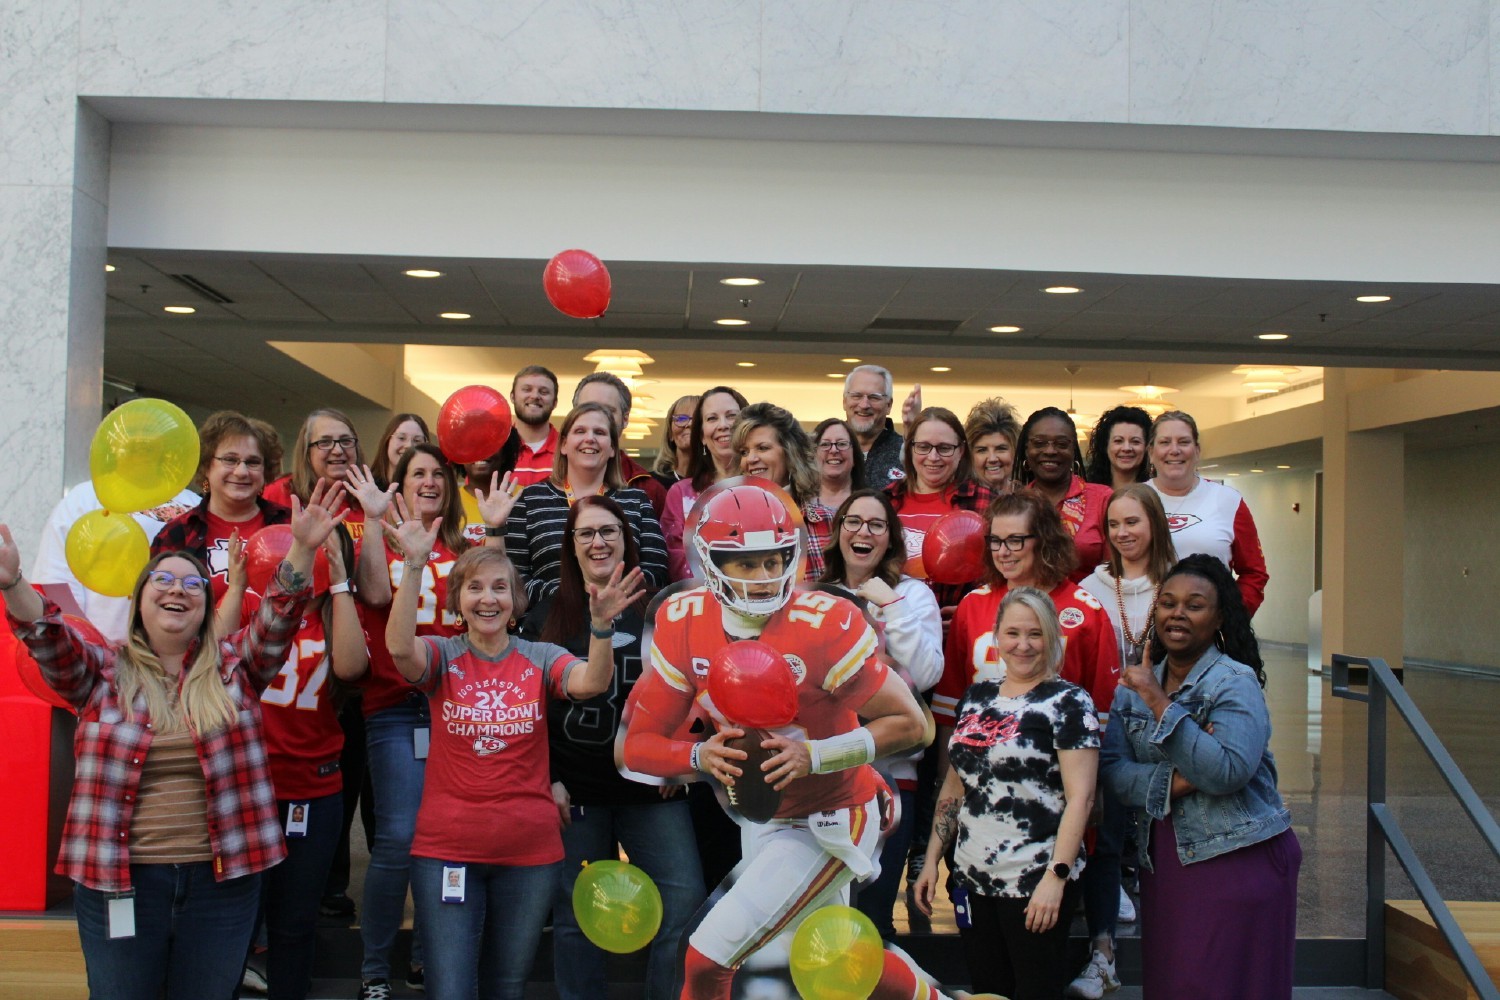 The IAT employees in Kansas City celebrate Super Bowl win!